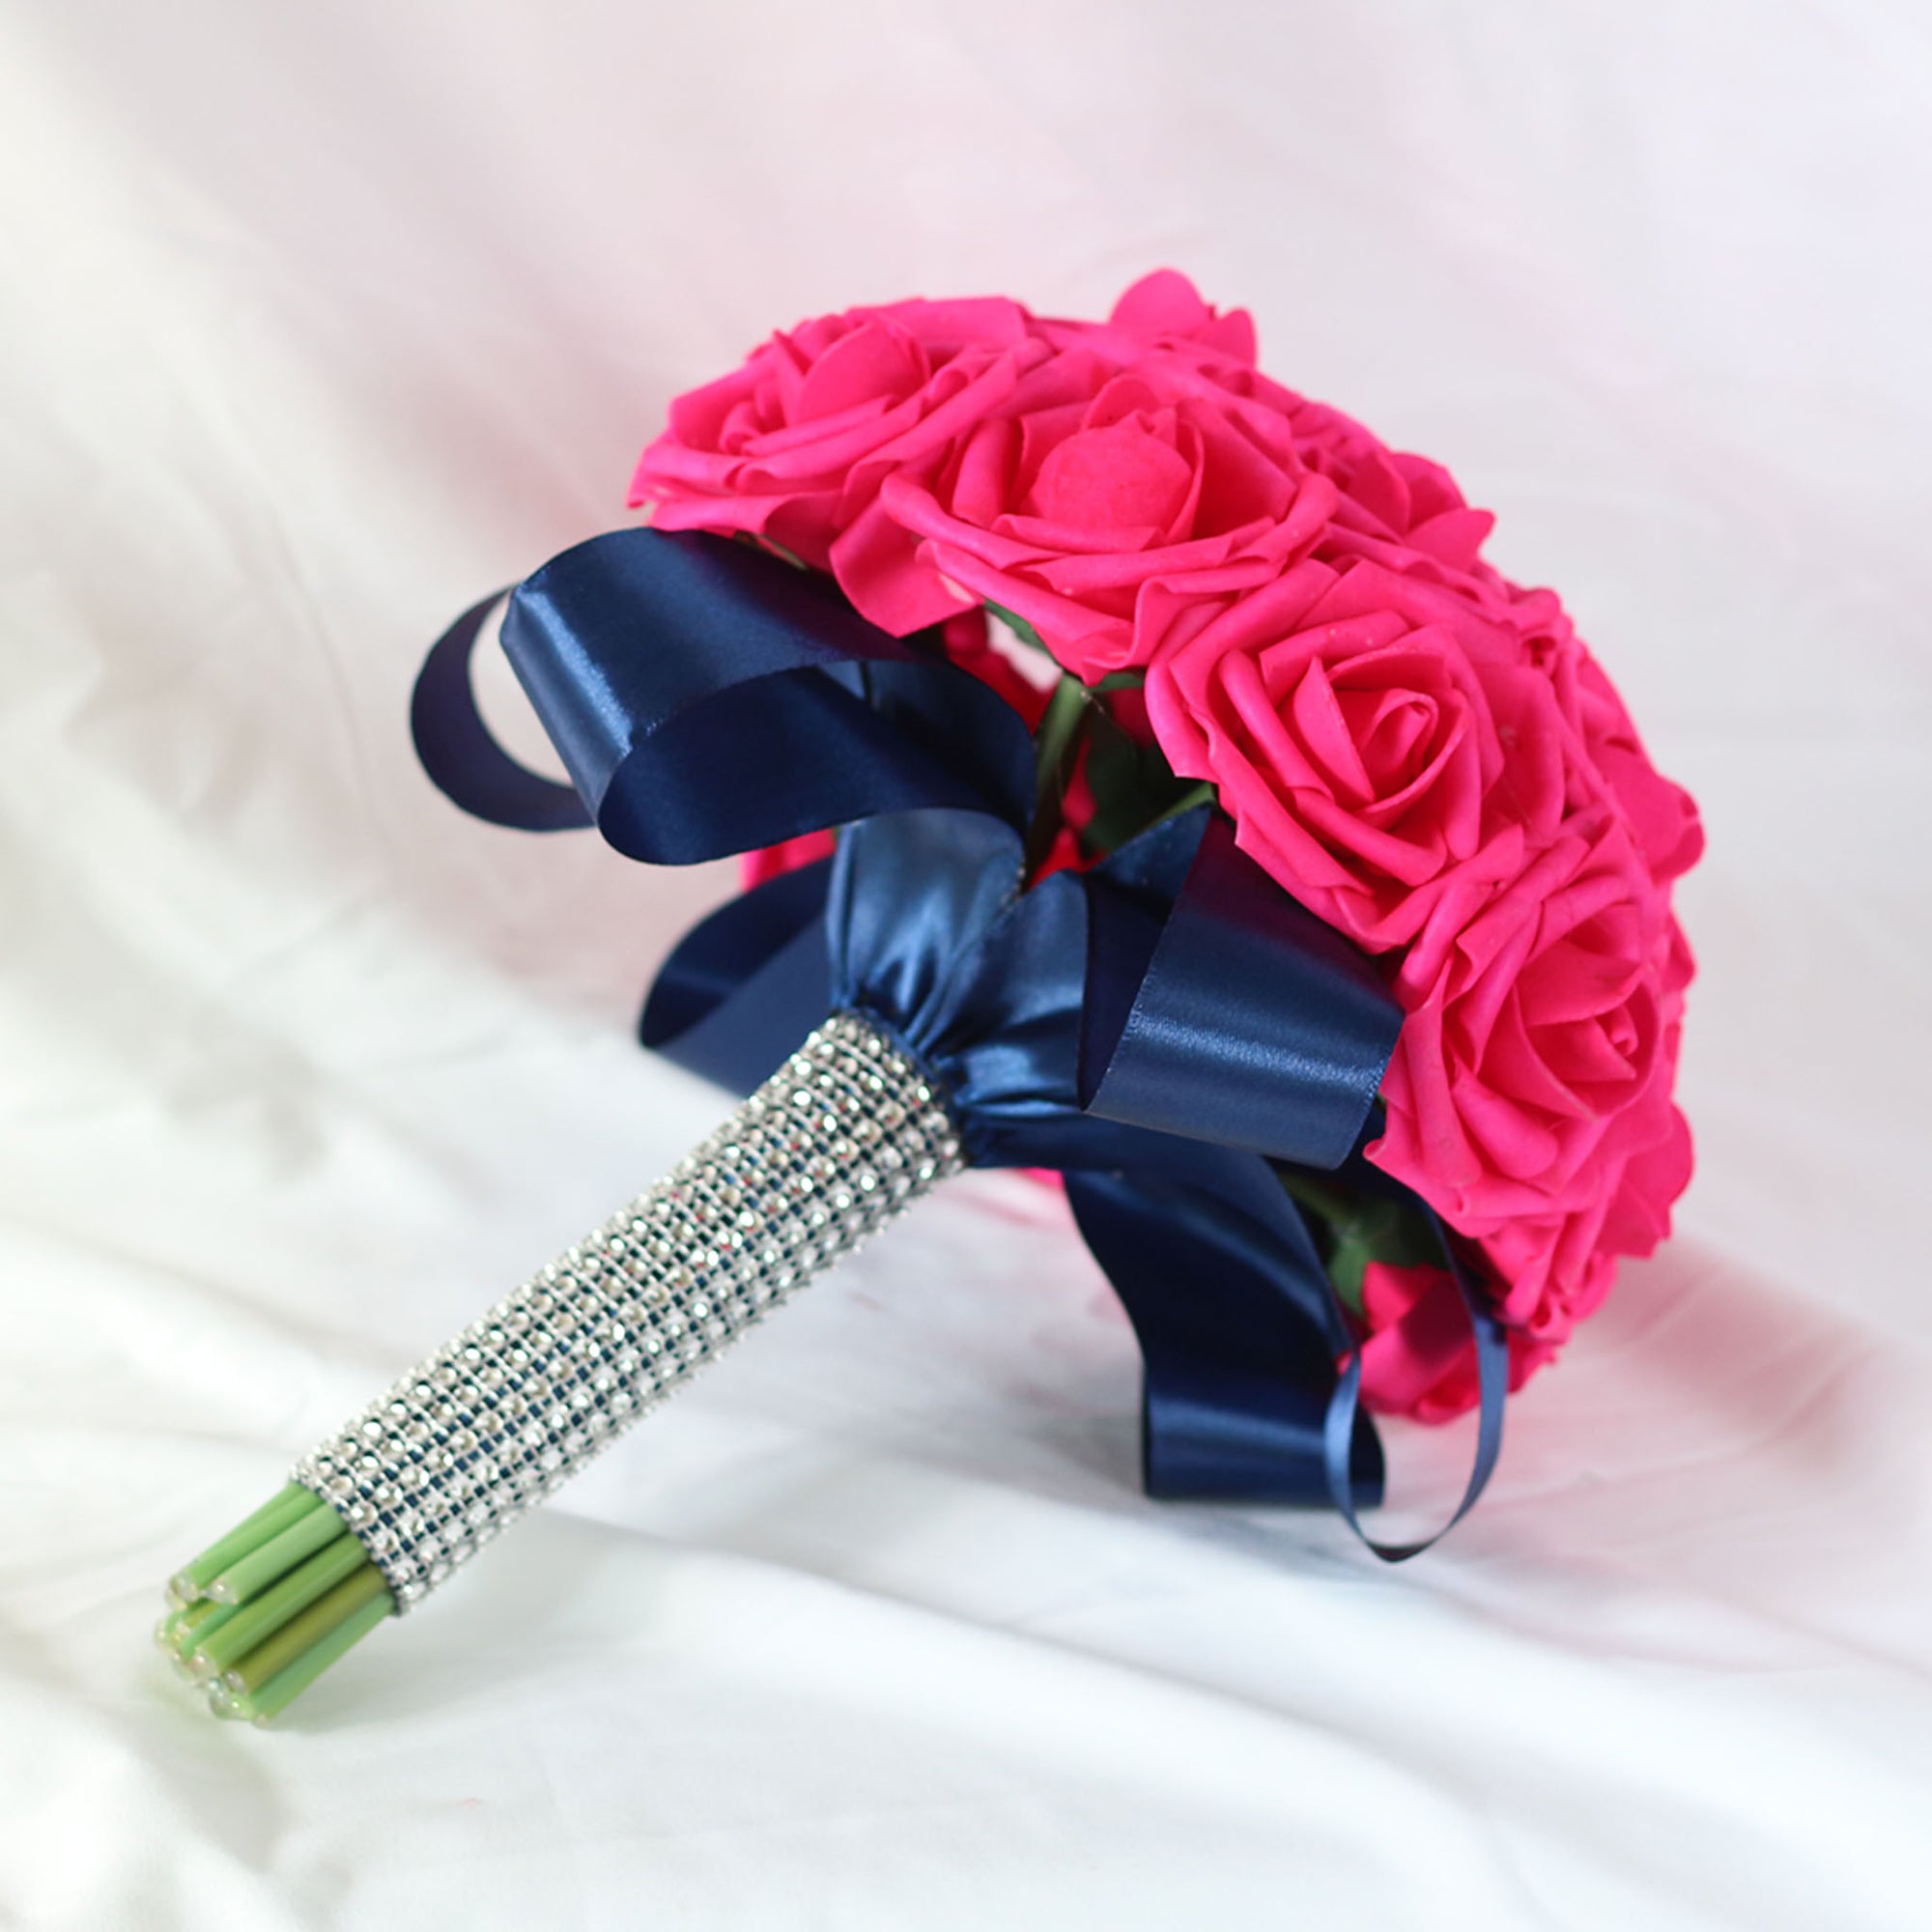 Bridal Hot Pink Bouquets Sets Corsages and Boutonnieres